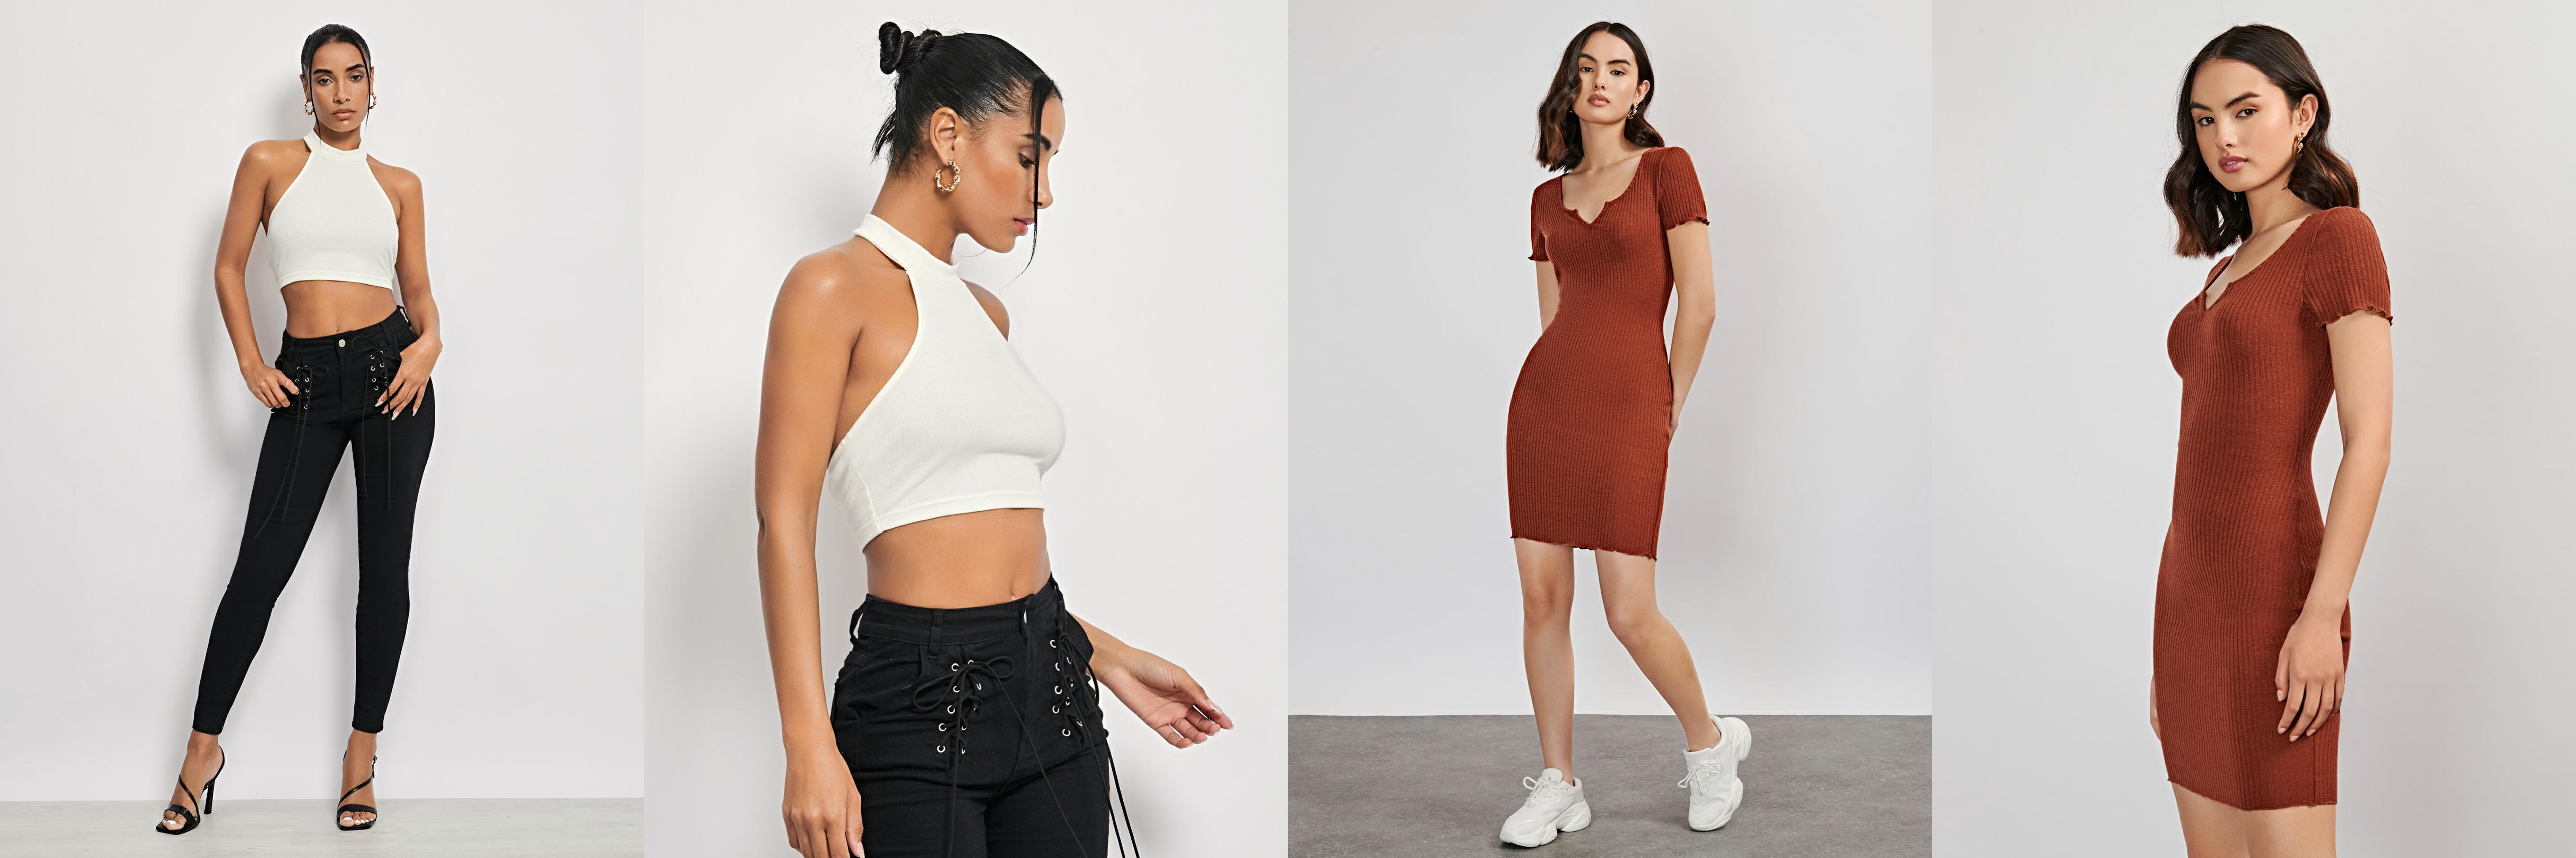 SHEIN Features New Clothing Line evoluSHEIN For Its 6.6 Mid-Year